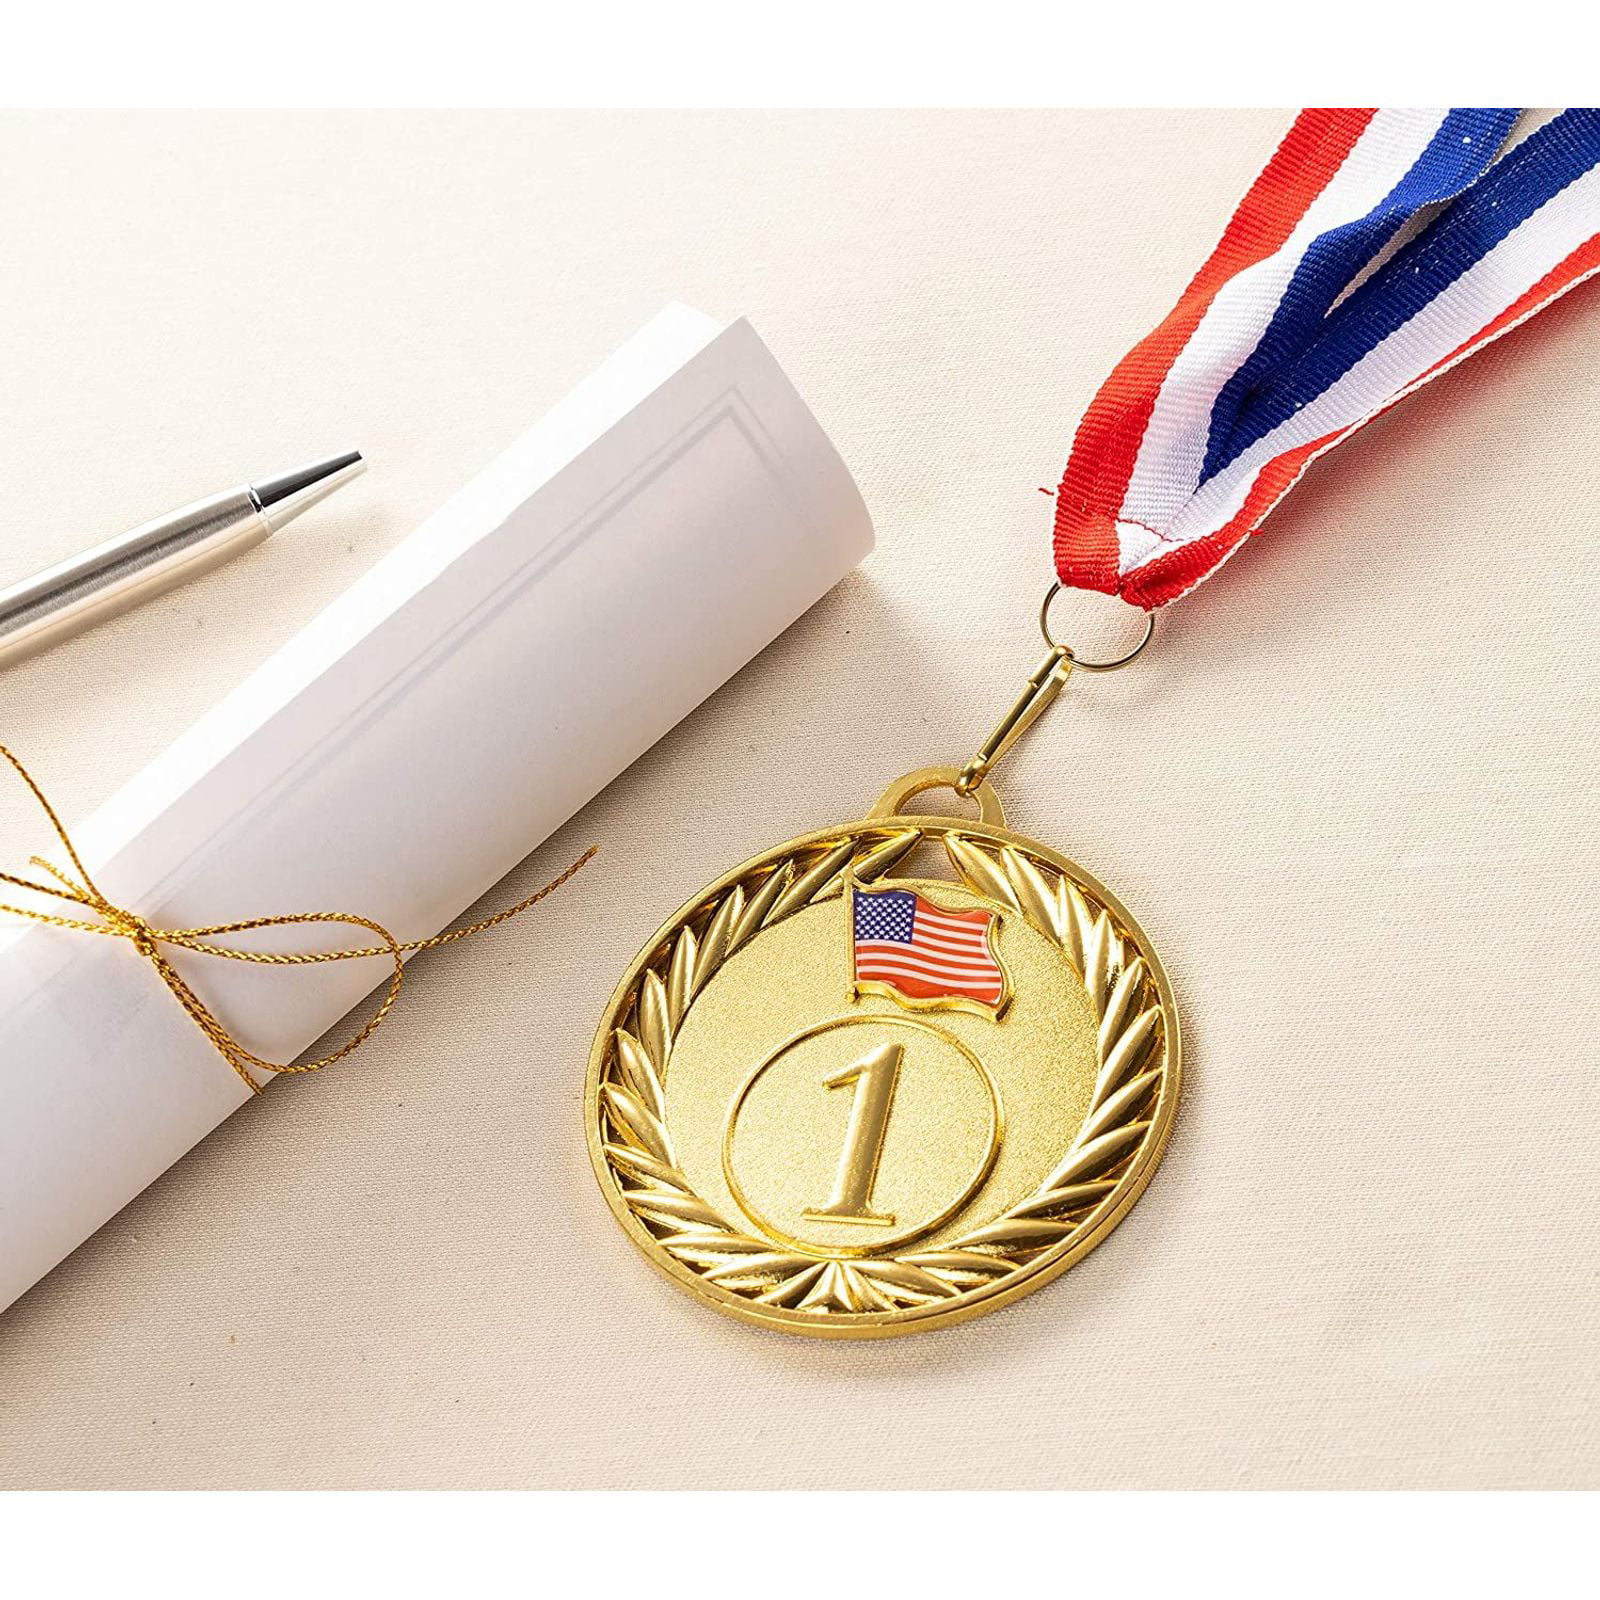 Winner Medals,60Pcs Metal Award Medals,Kids Plastic Gold Winner Gold Award Medals,Gold Silver Bronze Winner Award Medals Metal Medals Prizes with Neck Ribbon for Sports Competitions Spelling Bees 